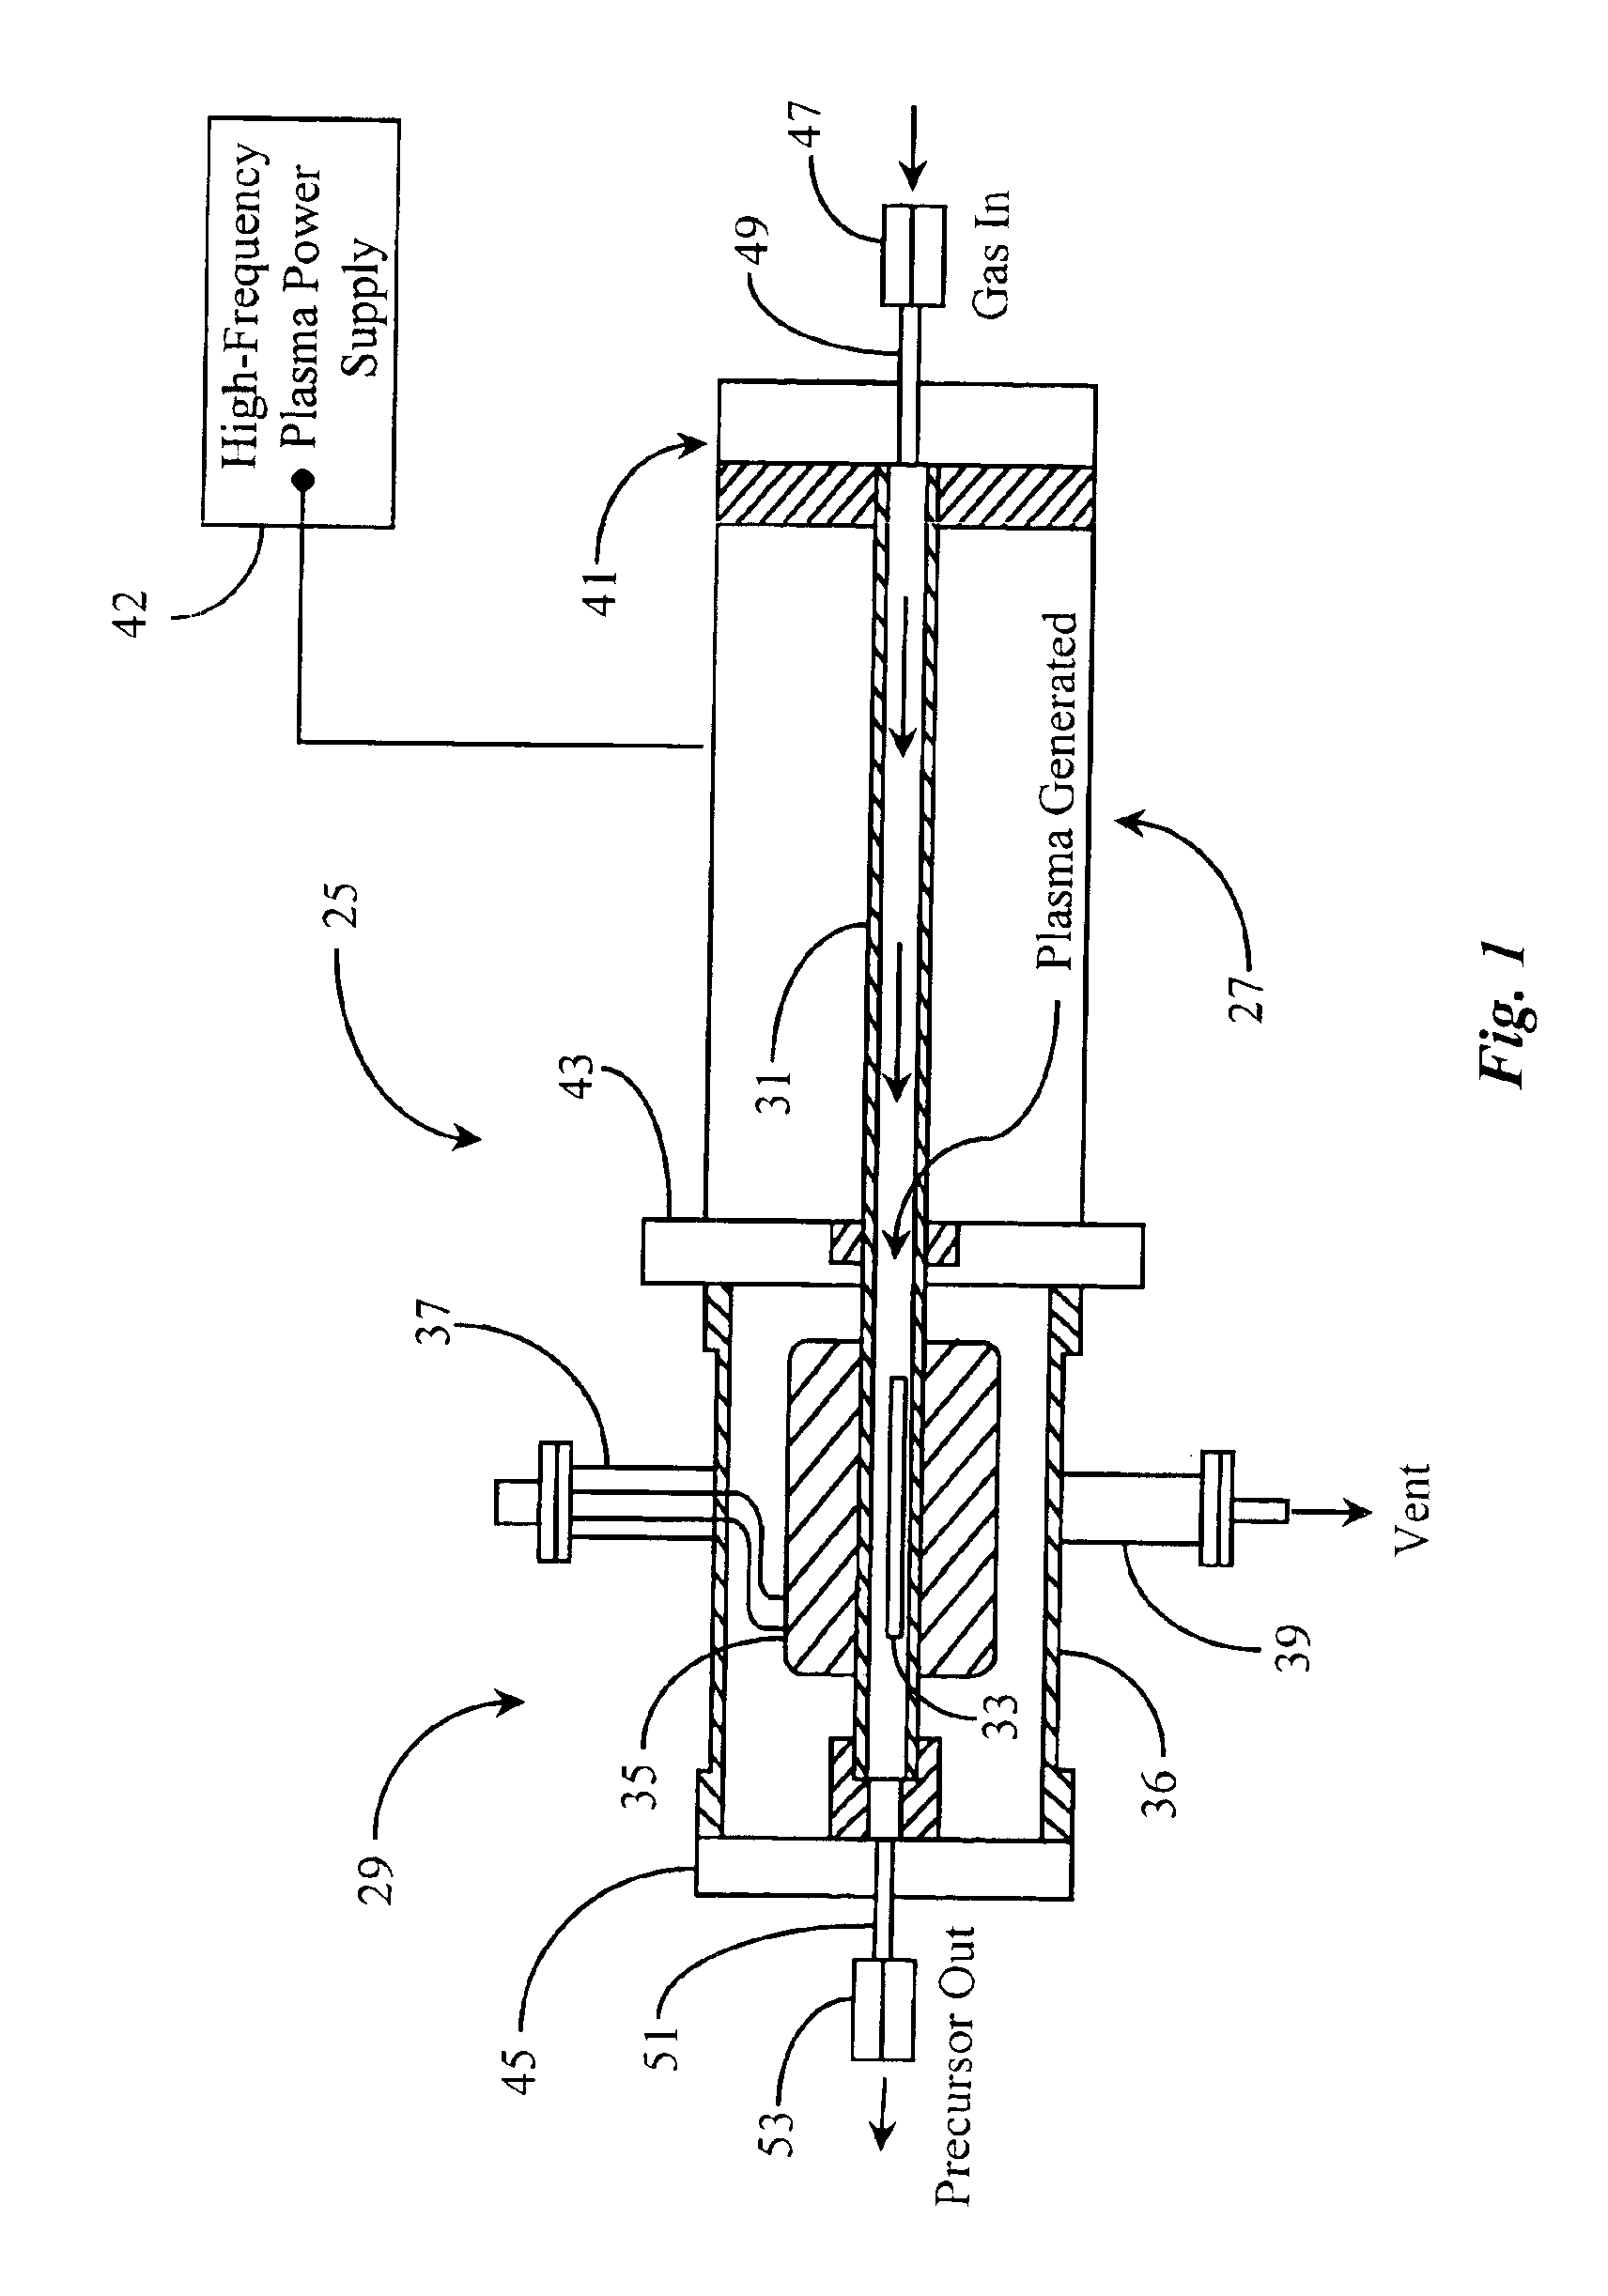 Method and apparatus for providing and integrating a general metal delivery source (GMDS) with atomic layer deposition (ALD)